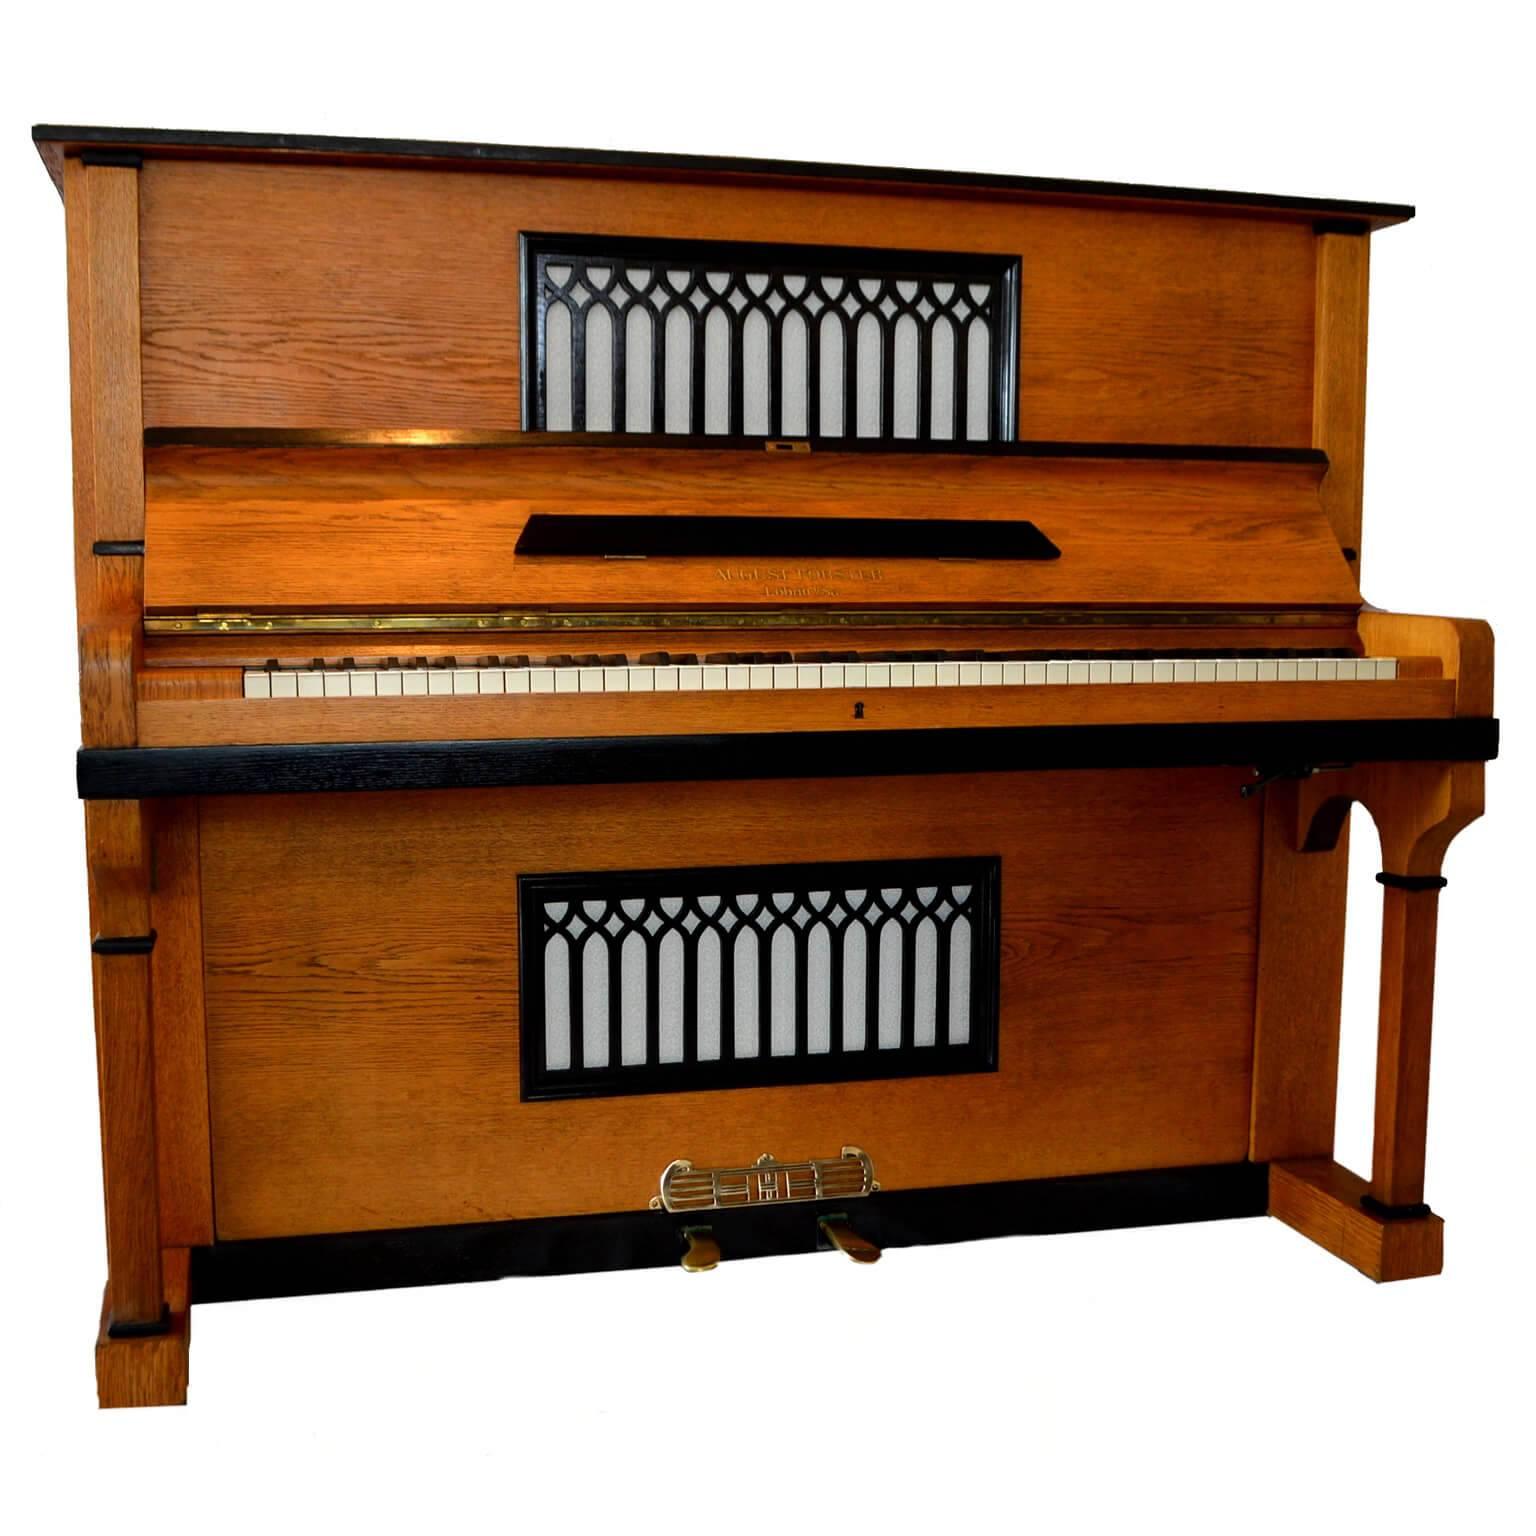 August Forster Upright Piano in Oak Gothic Revival Style